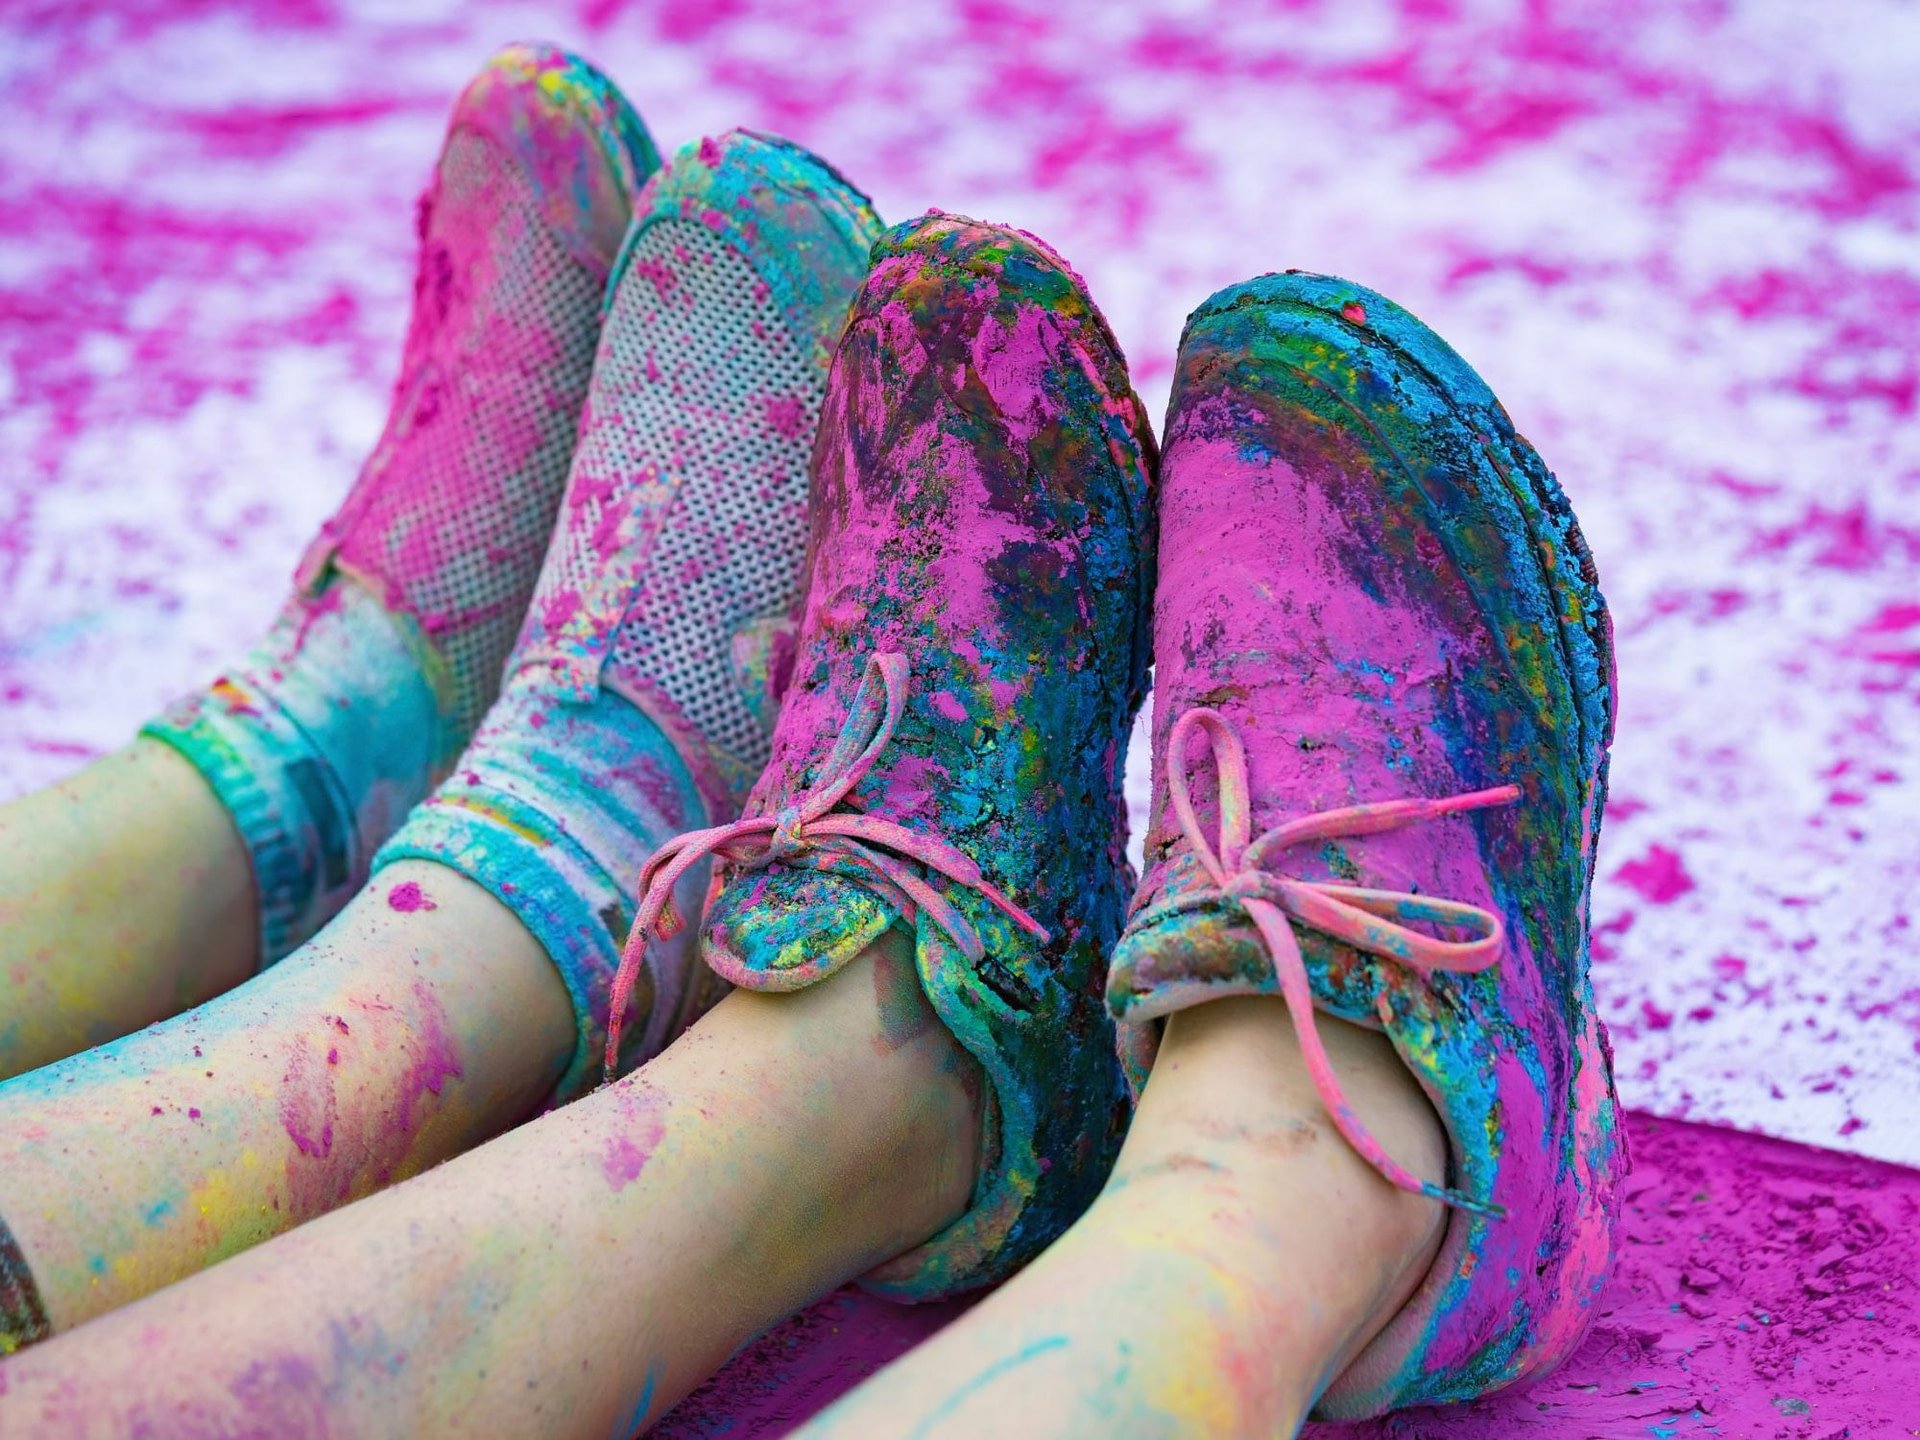 The colorful shoes and legs of teenagers with purple color powder in the public event The Color Run